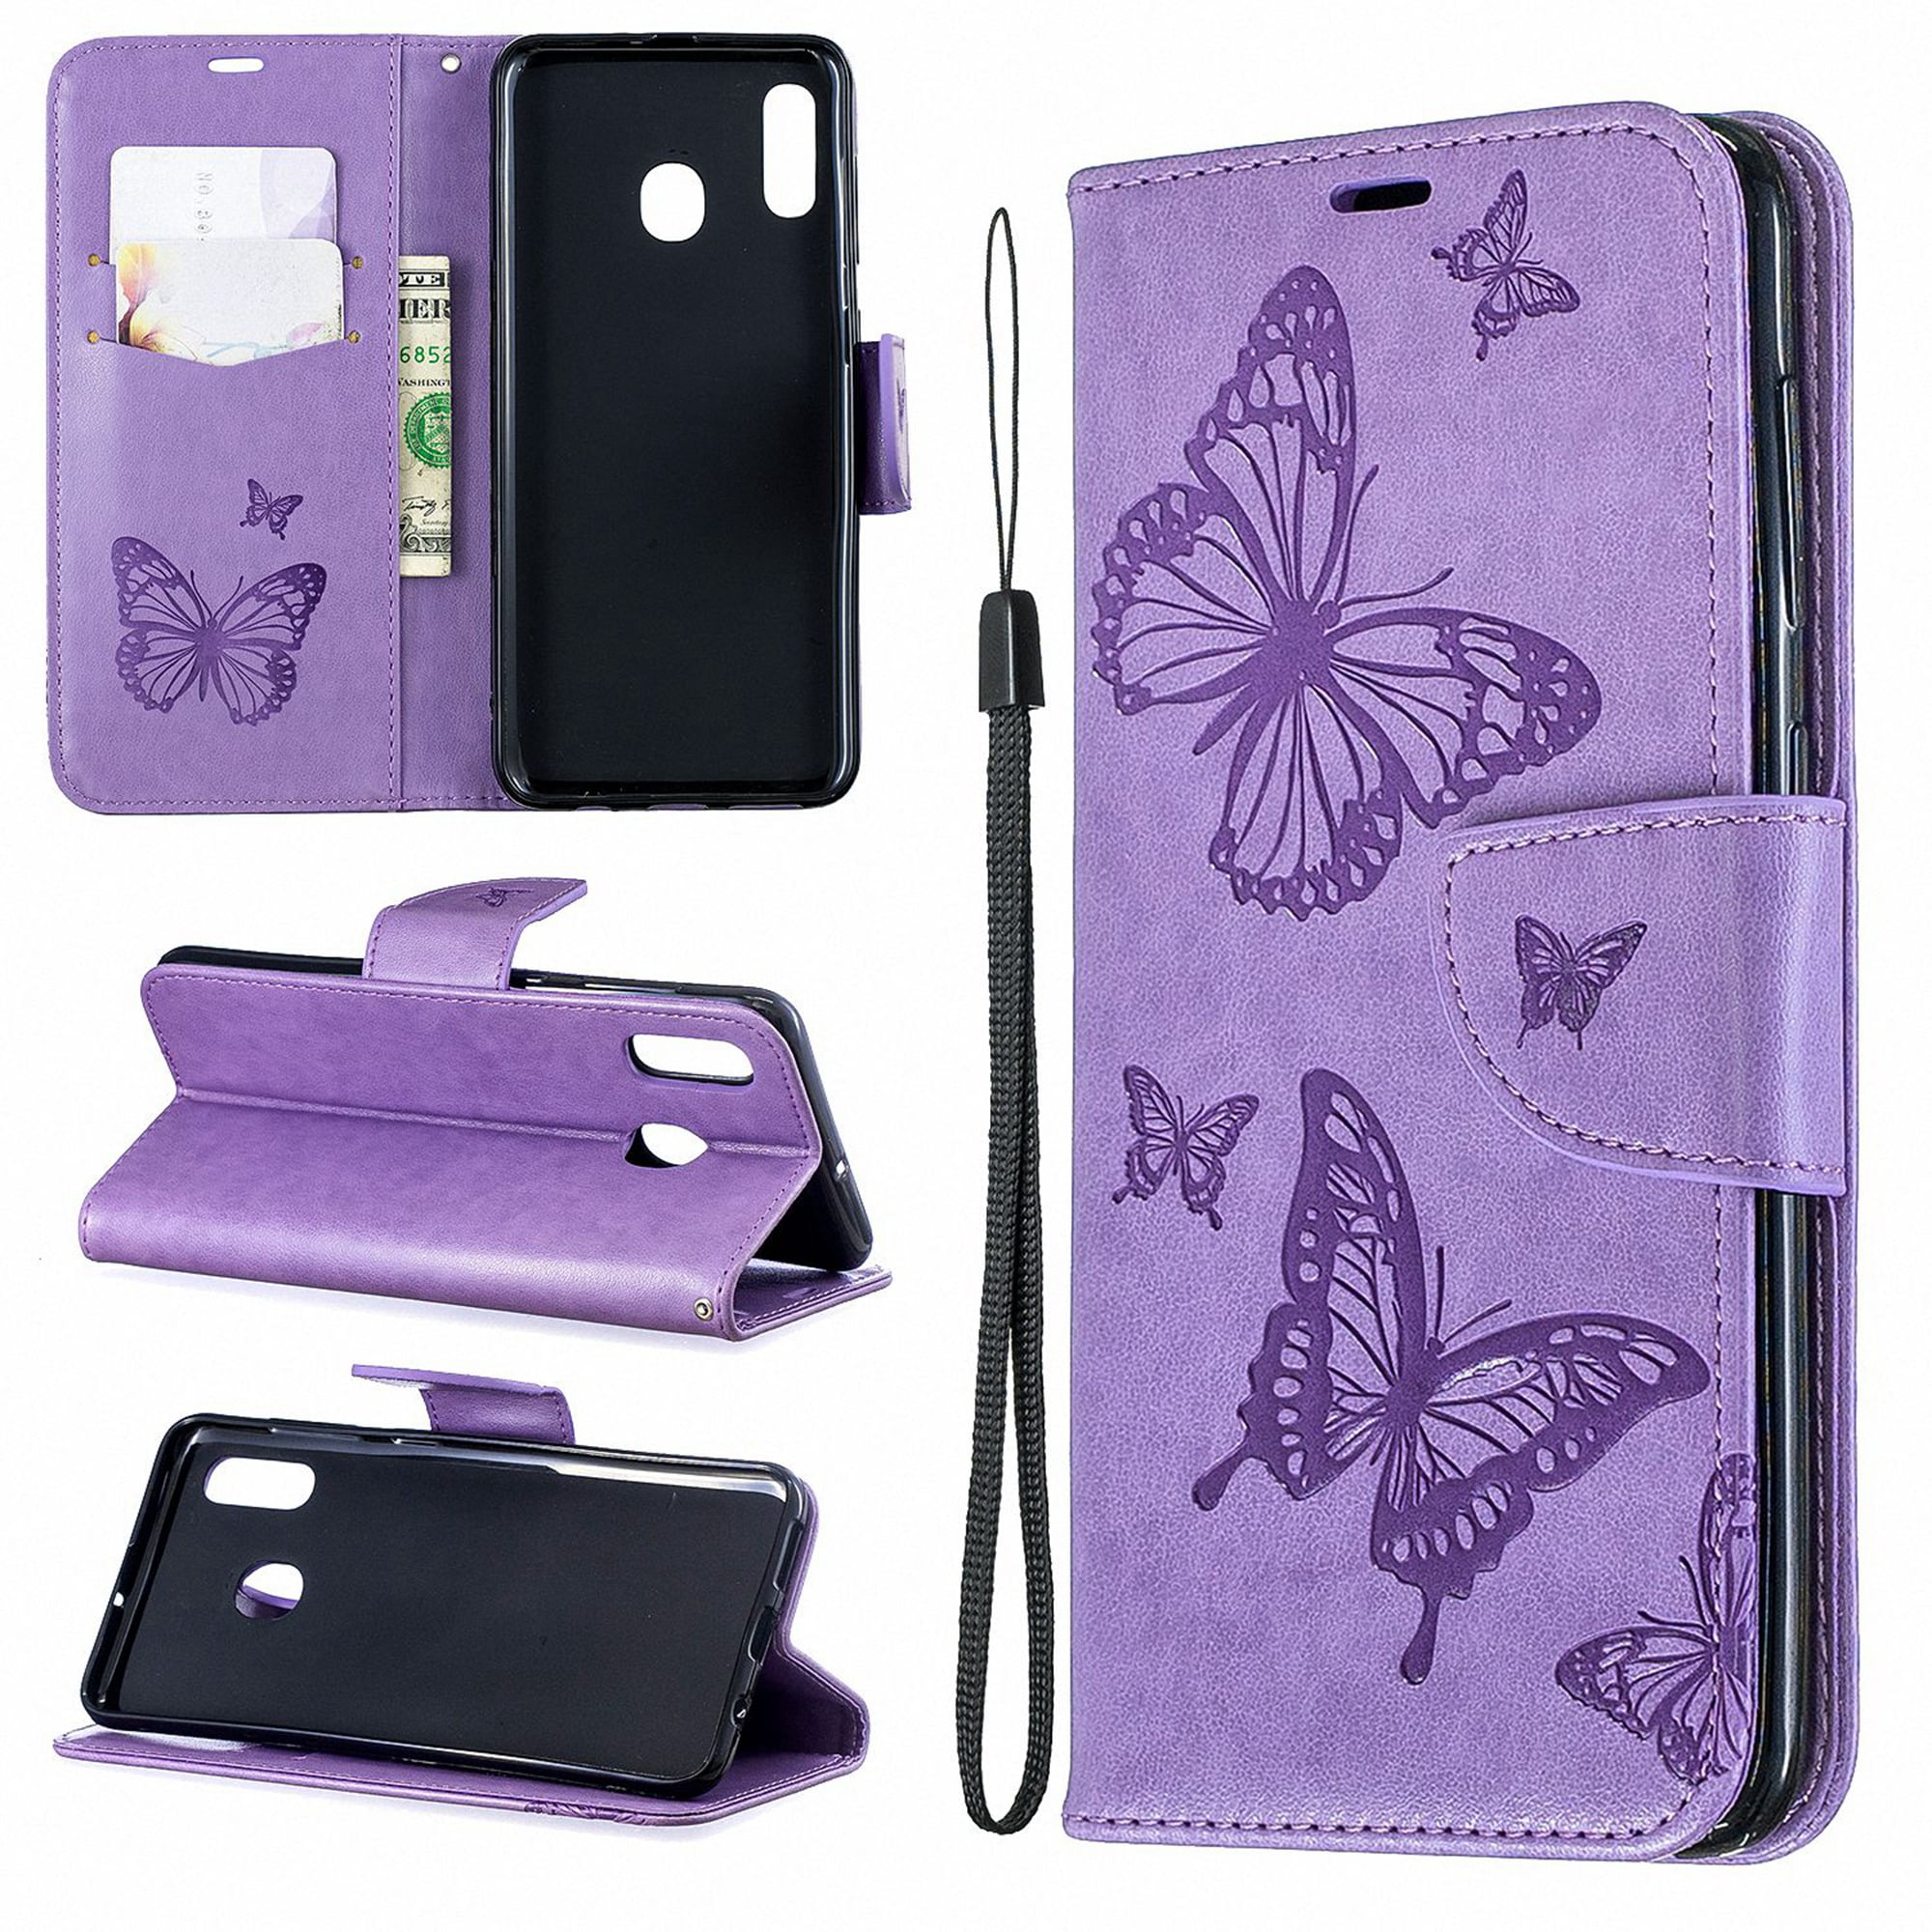 Samsung Galaxy A30 Case, Galaxy A20 Case, Dteck Embossed Butterfly Flip